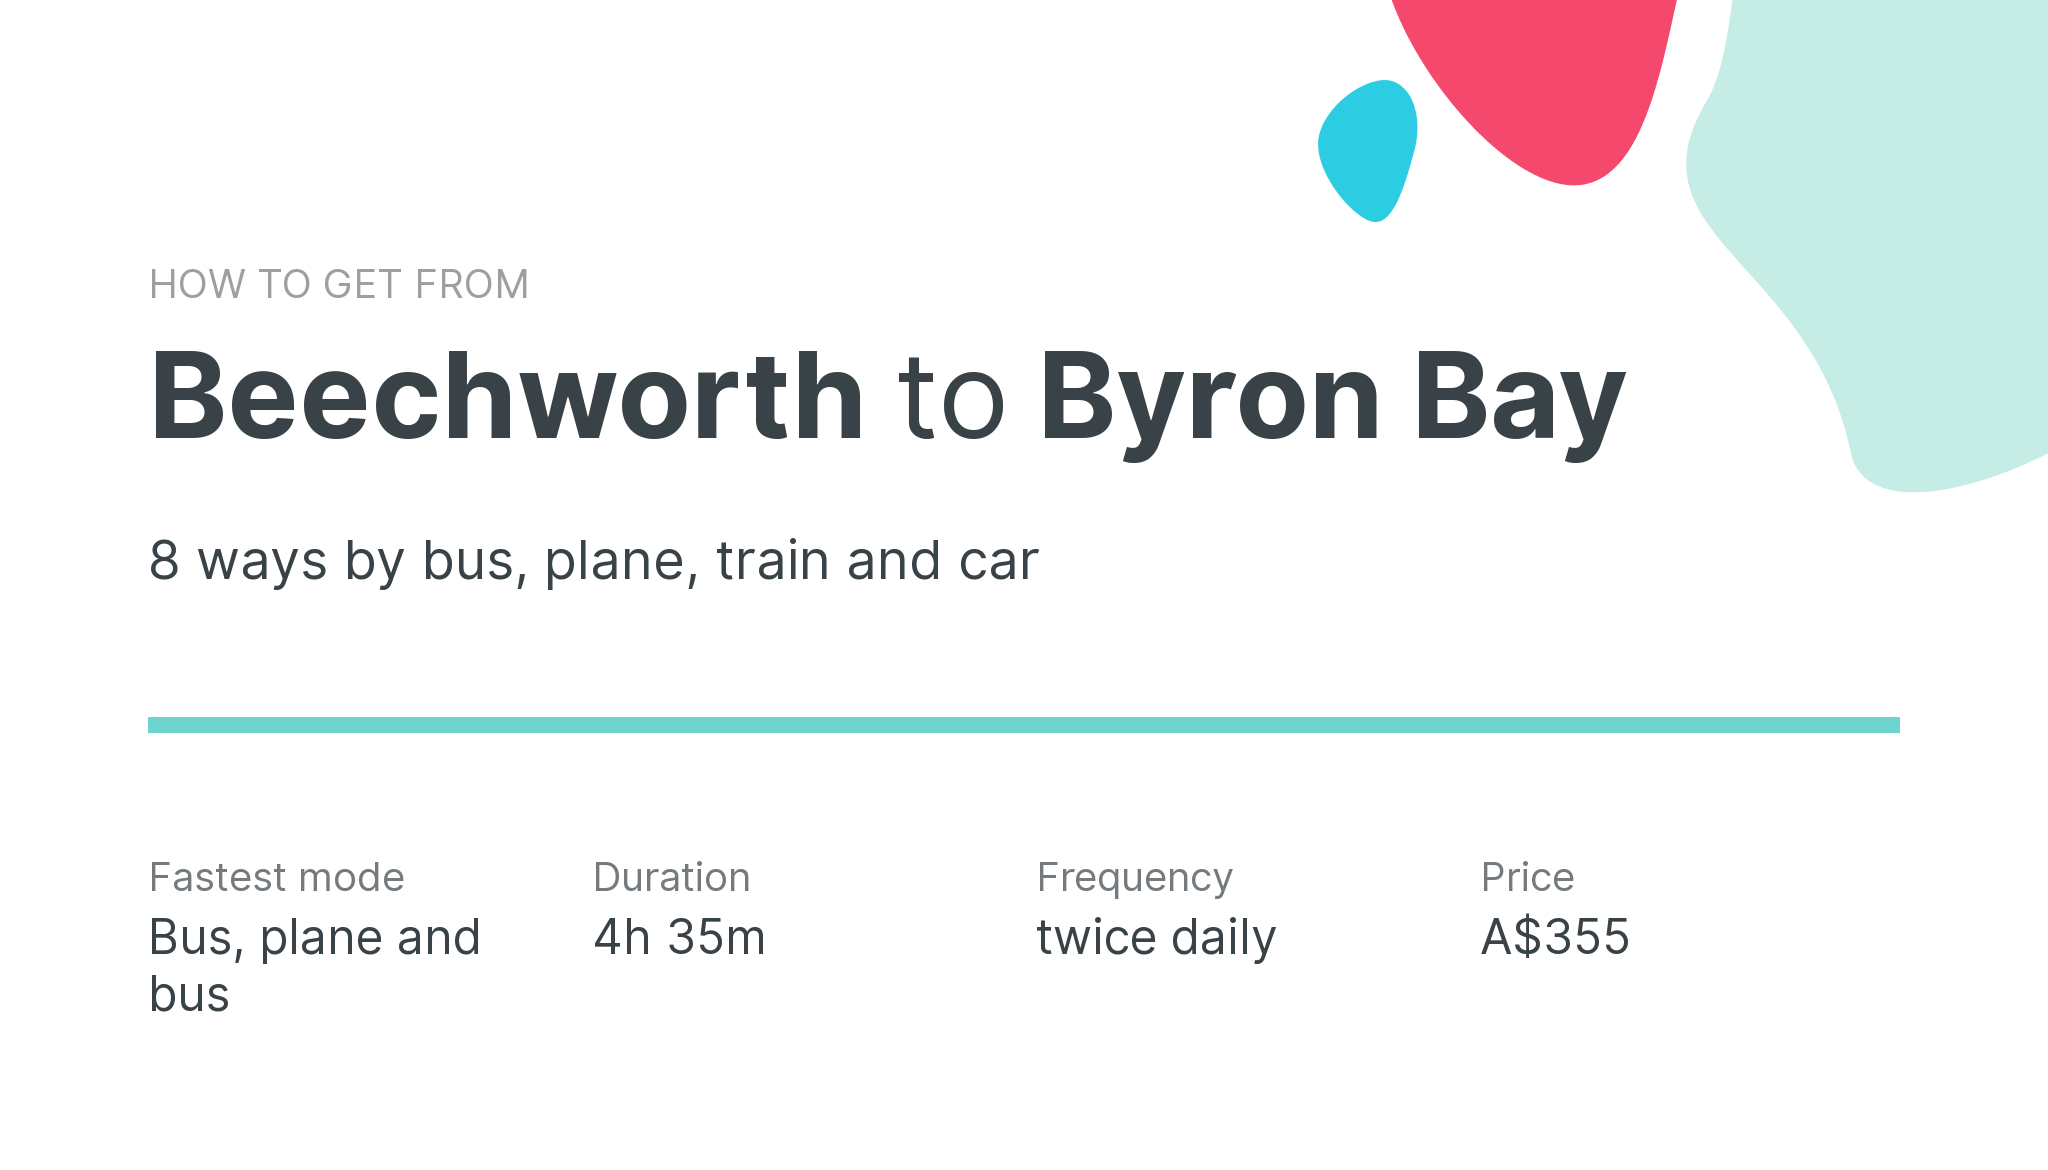 How do I get from Beechworth to Byron Bay